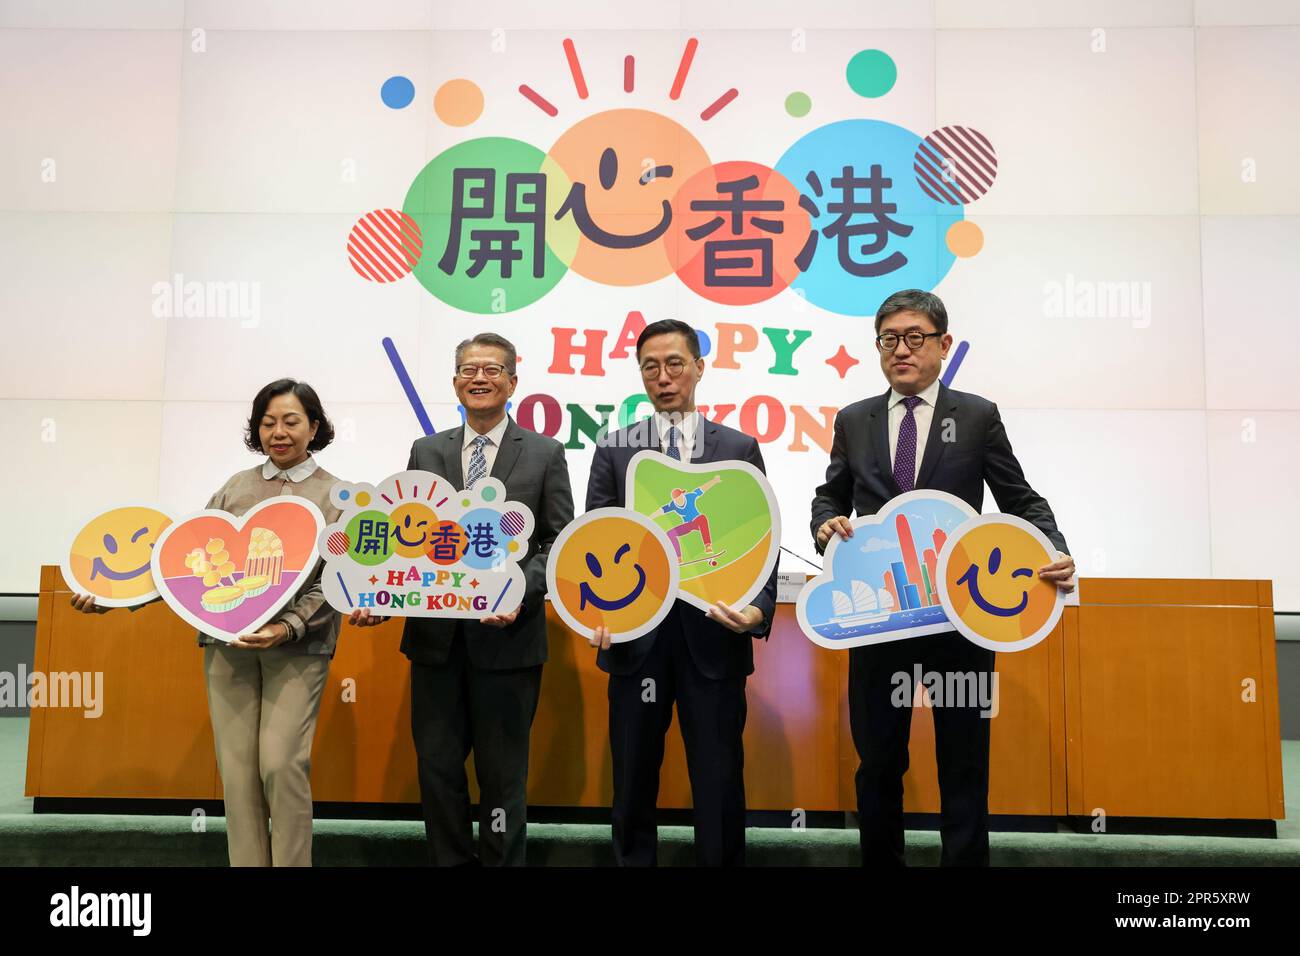 L to R) Secretary for Home and Youth Affairs, Alice Mak Mei-kuen; Financial Secretary, Paul Chan Mo-po; Secretary for Culture, Sports and Tourism, Kevin Yeung Yun-hung; and Executive Director of the Hong Kong Tourism Board, Dane Cheng, hold a press conference on the 'Happy Hong Kong' Campaign at the Central Government Offices (CGO), Tamar.     24APR23.   SCMP / May Tse Stock Photo